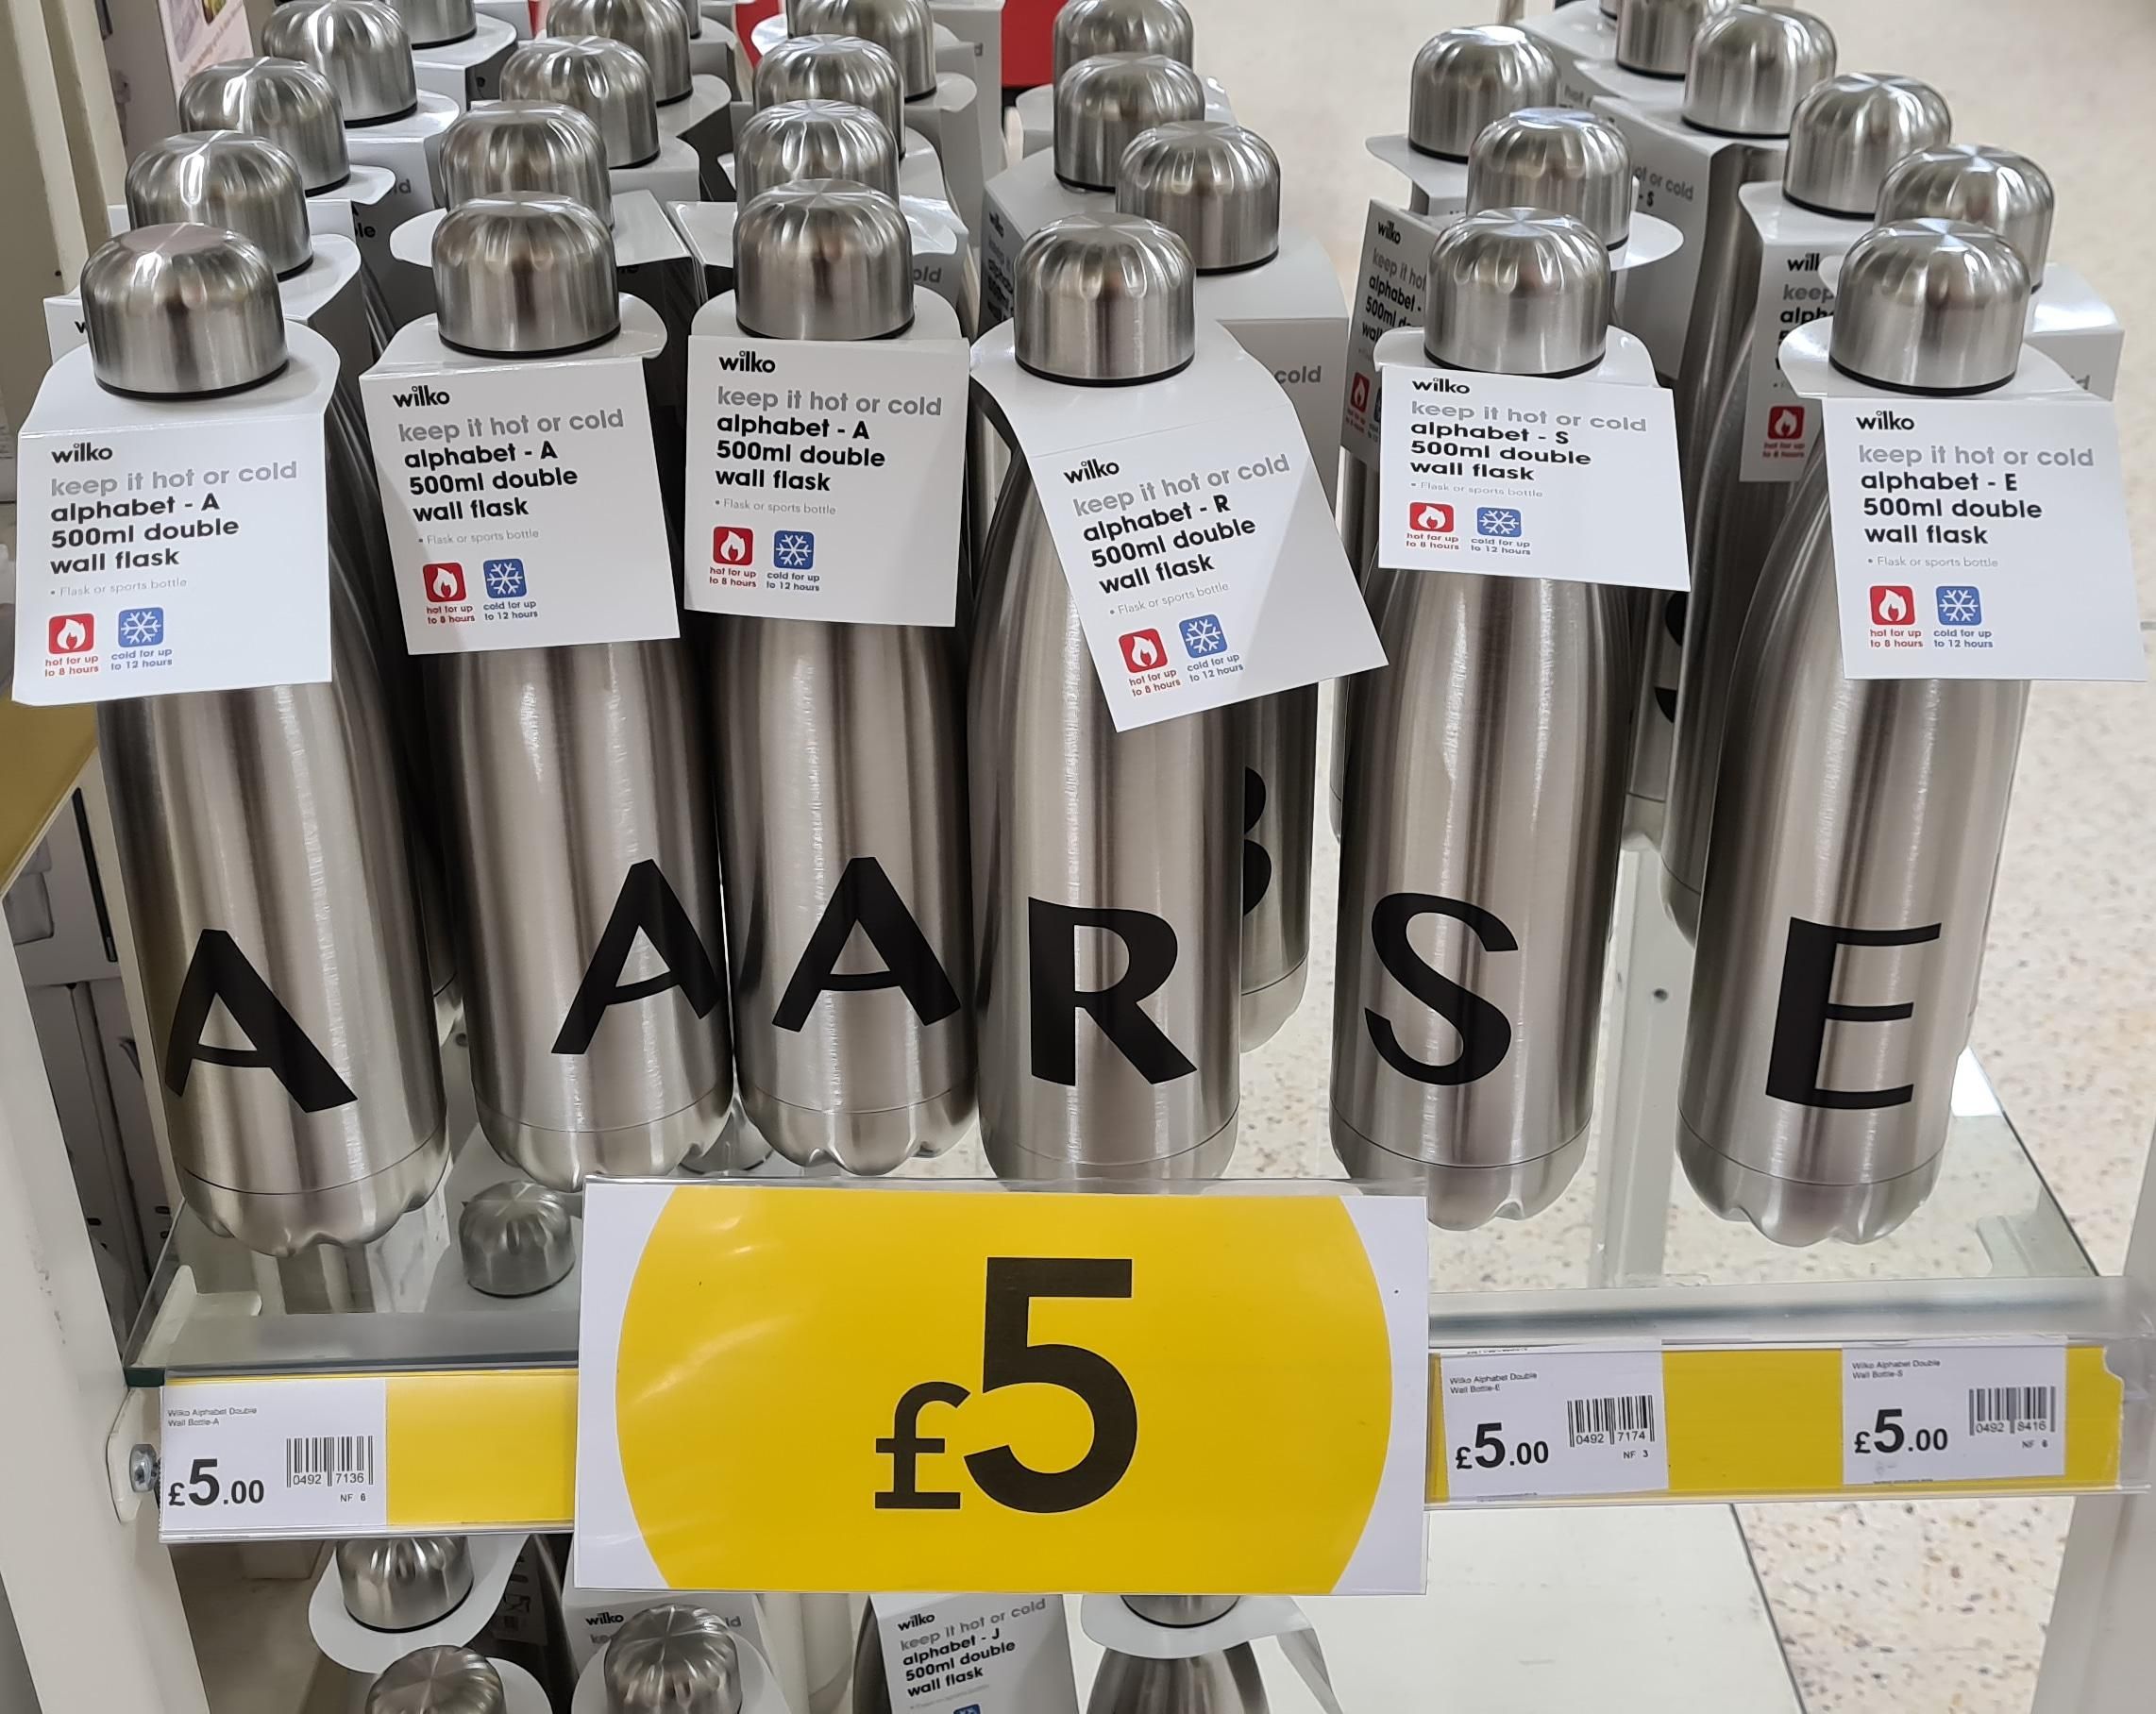 I'm 45 years old, but if I see letters on something in a shop well...